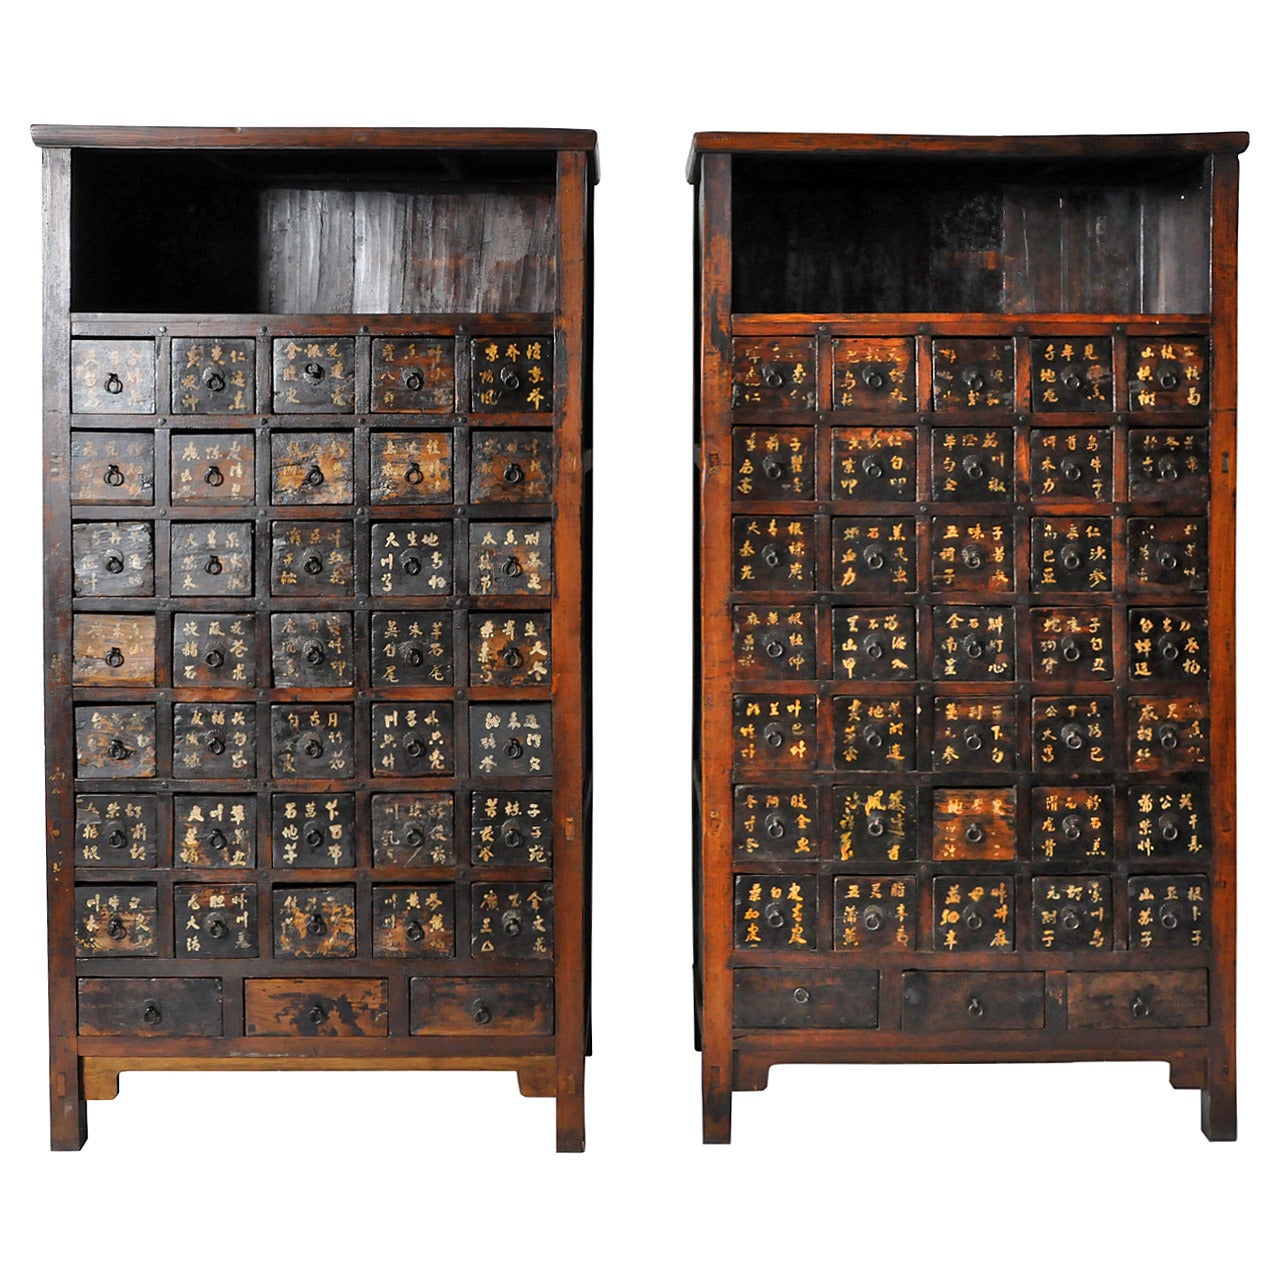 Pair of Qing Dynasty Medicine Chests